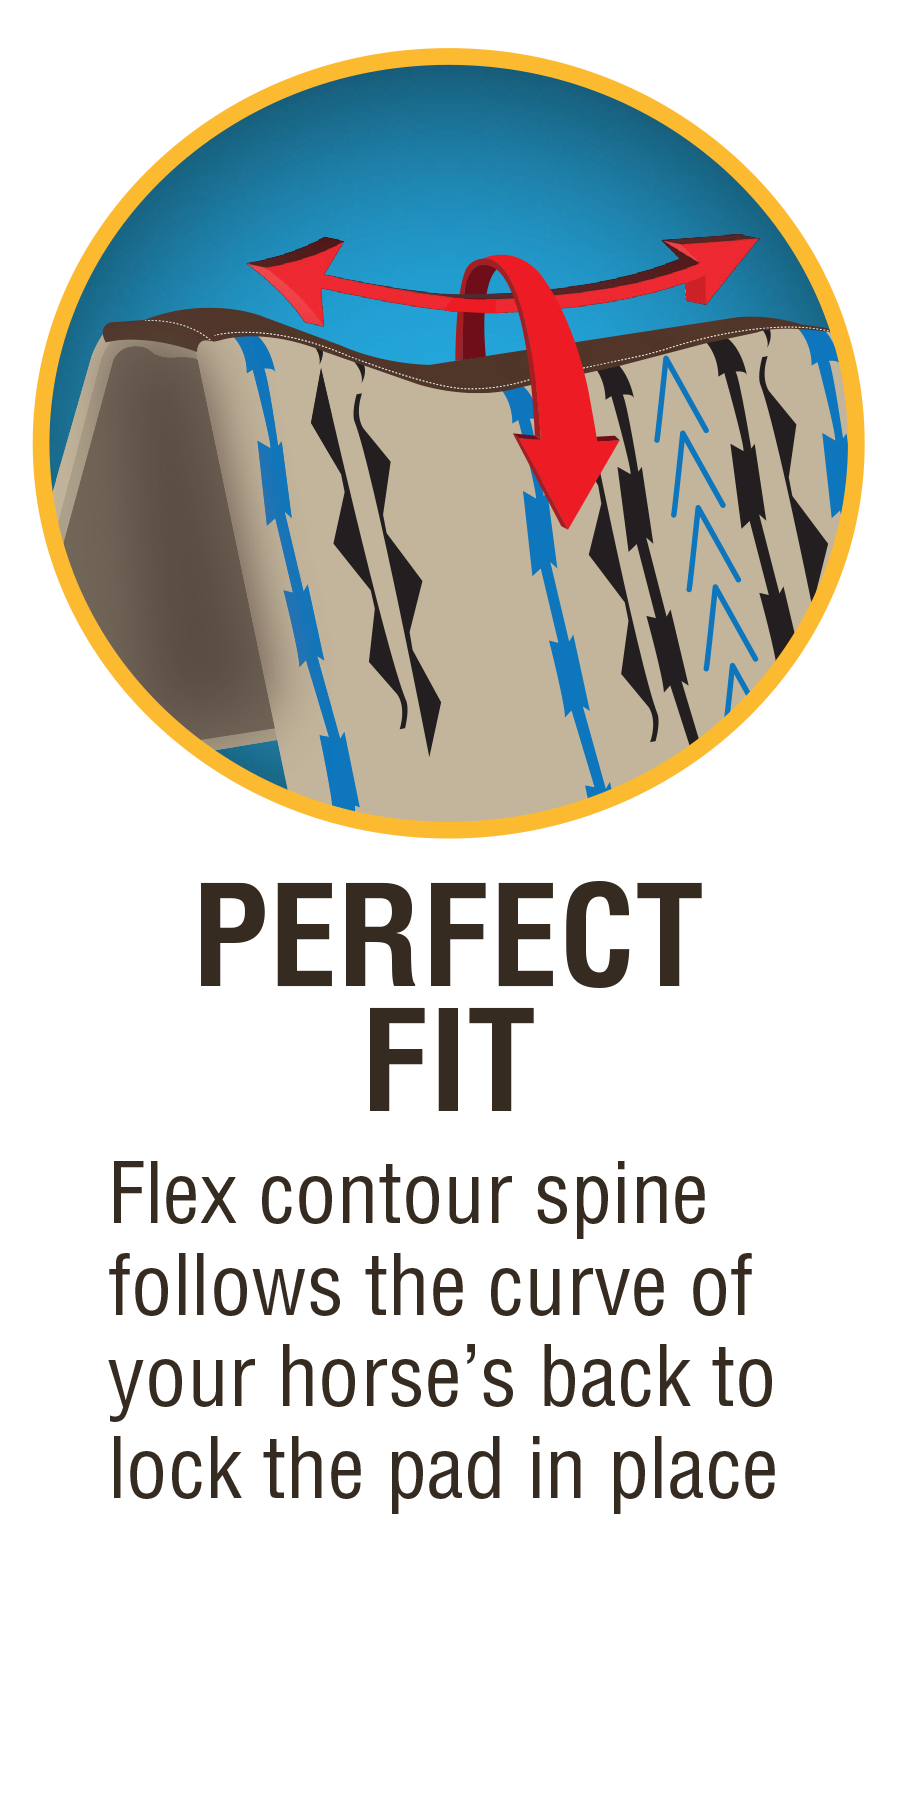 Perfect Fit Flex contour spine follows the curve of your horse’s back to lock the pad in place